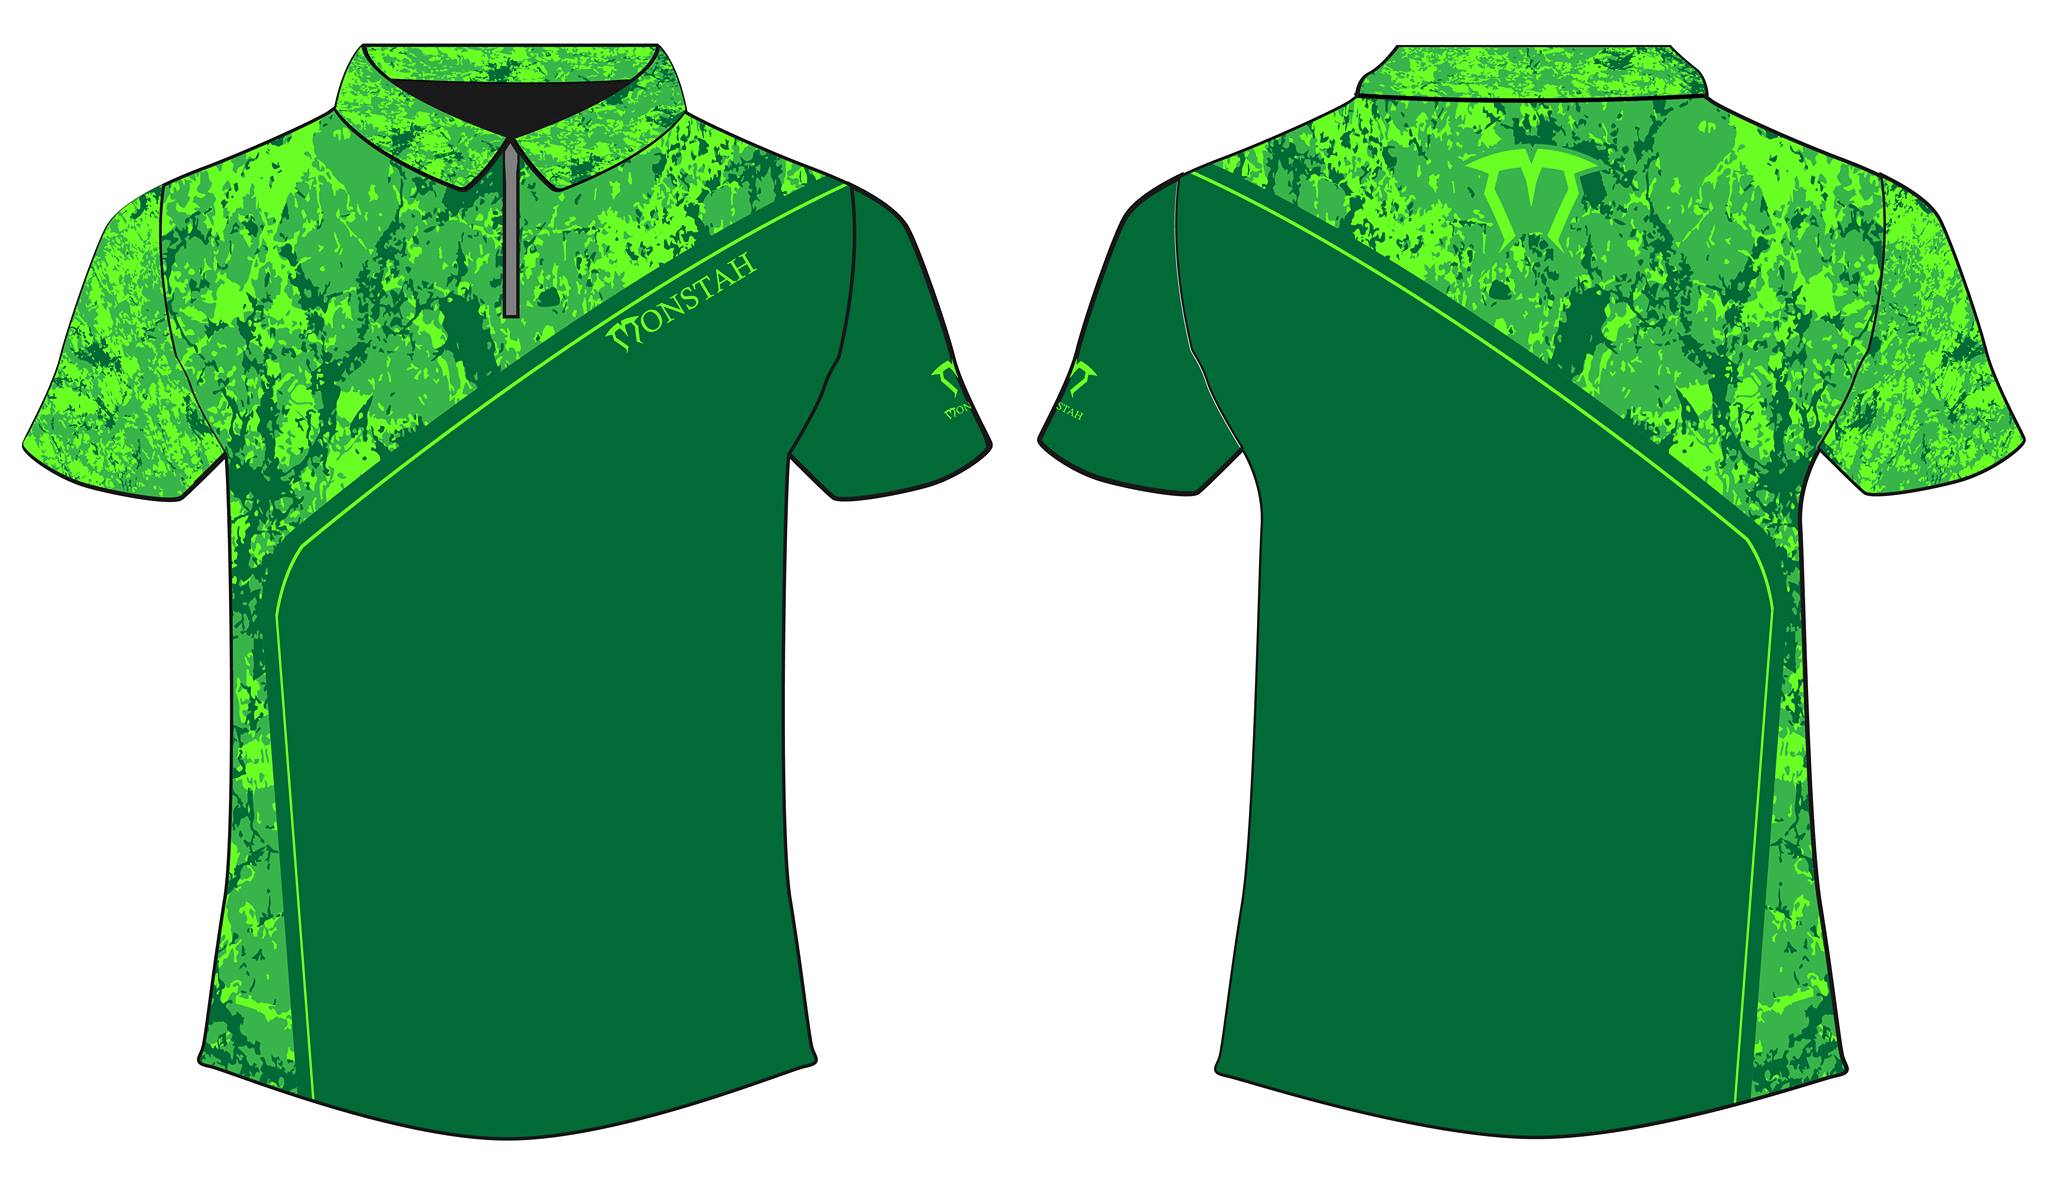 Picasso Green jersey